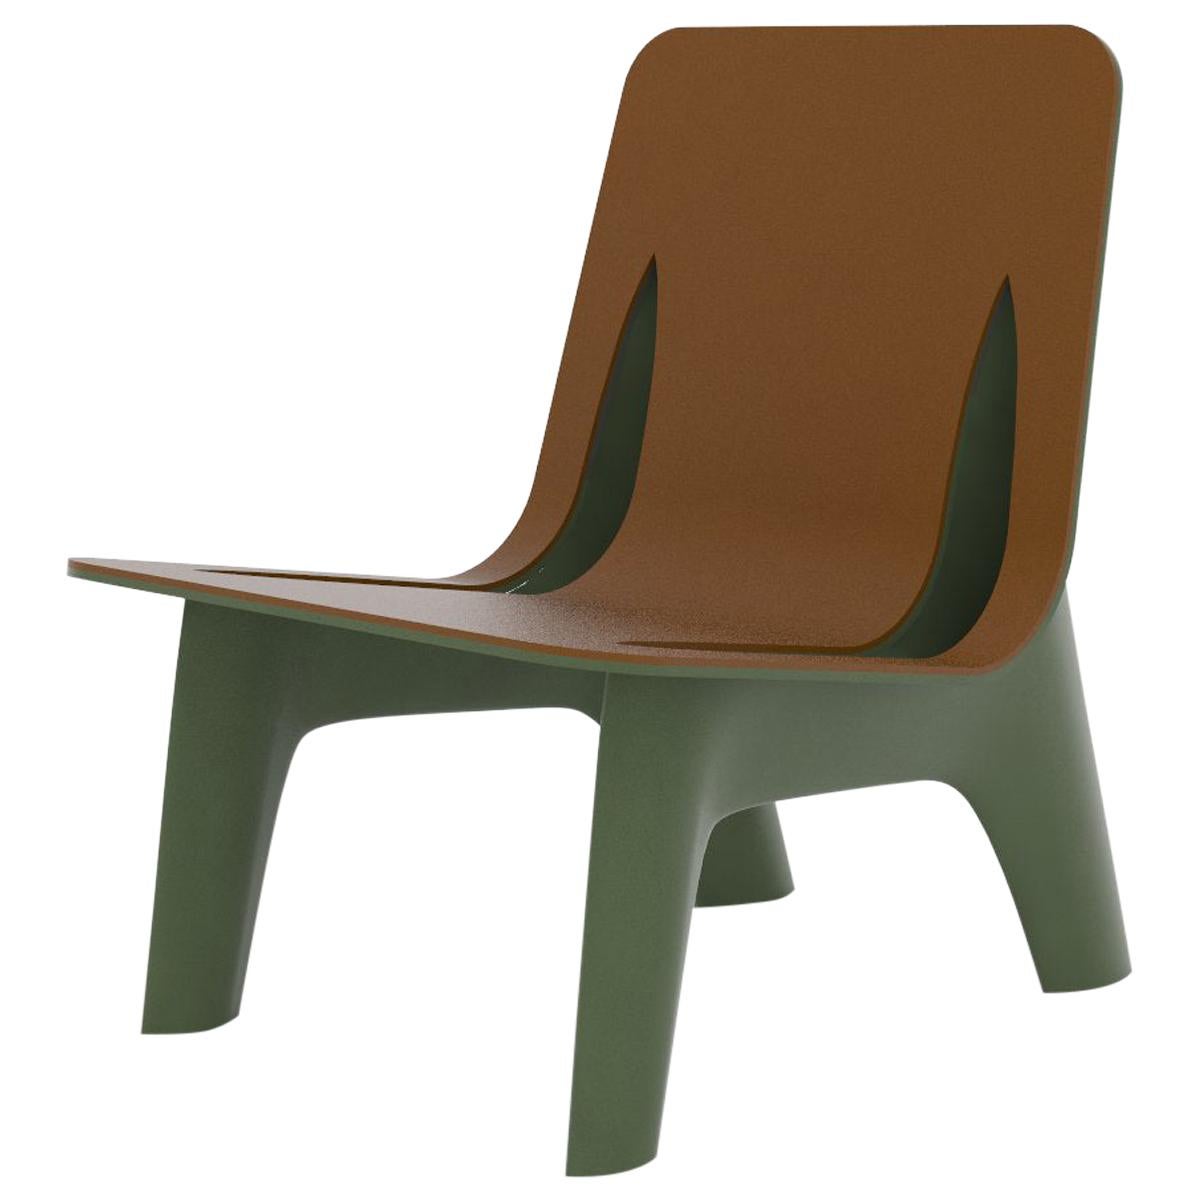 J-Chair Lounge Polished Olive Green Color Carbon Steel+Leather Seating by Zieta For Sale